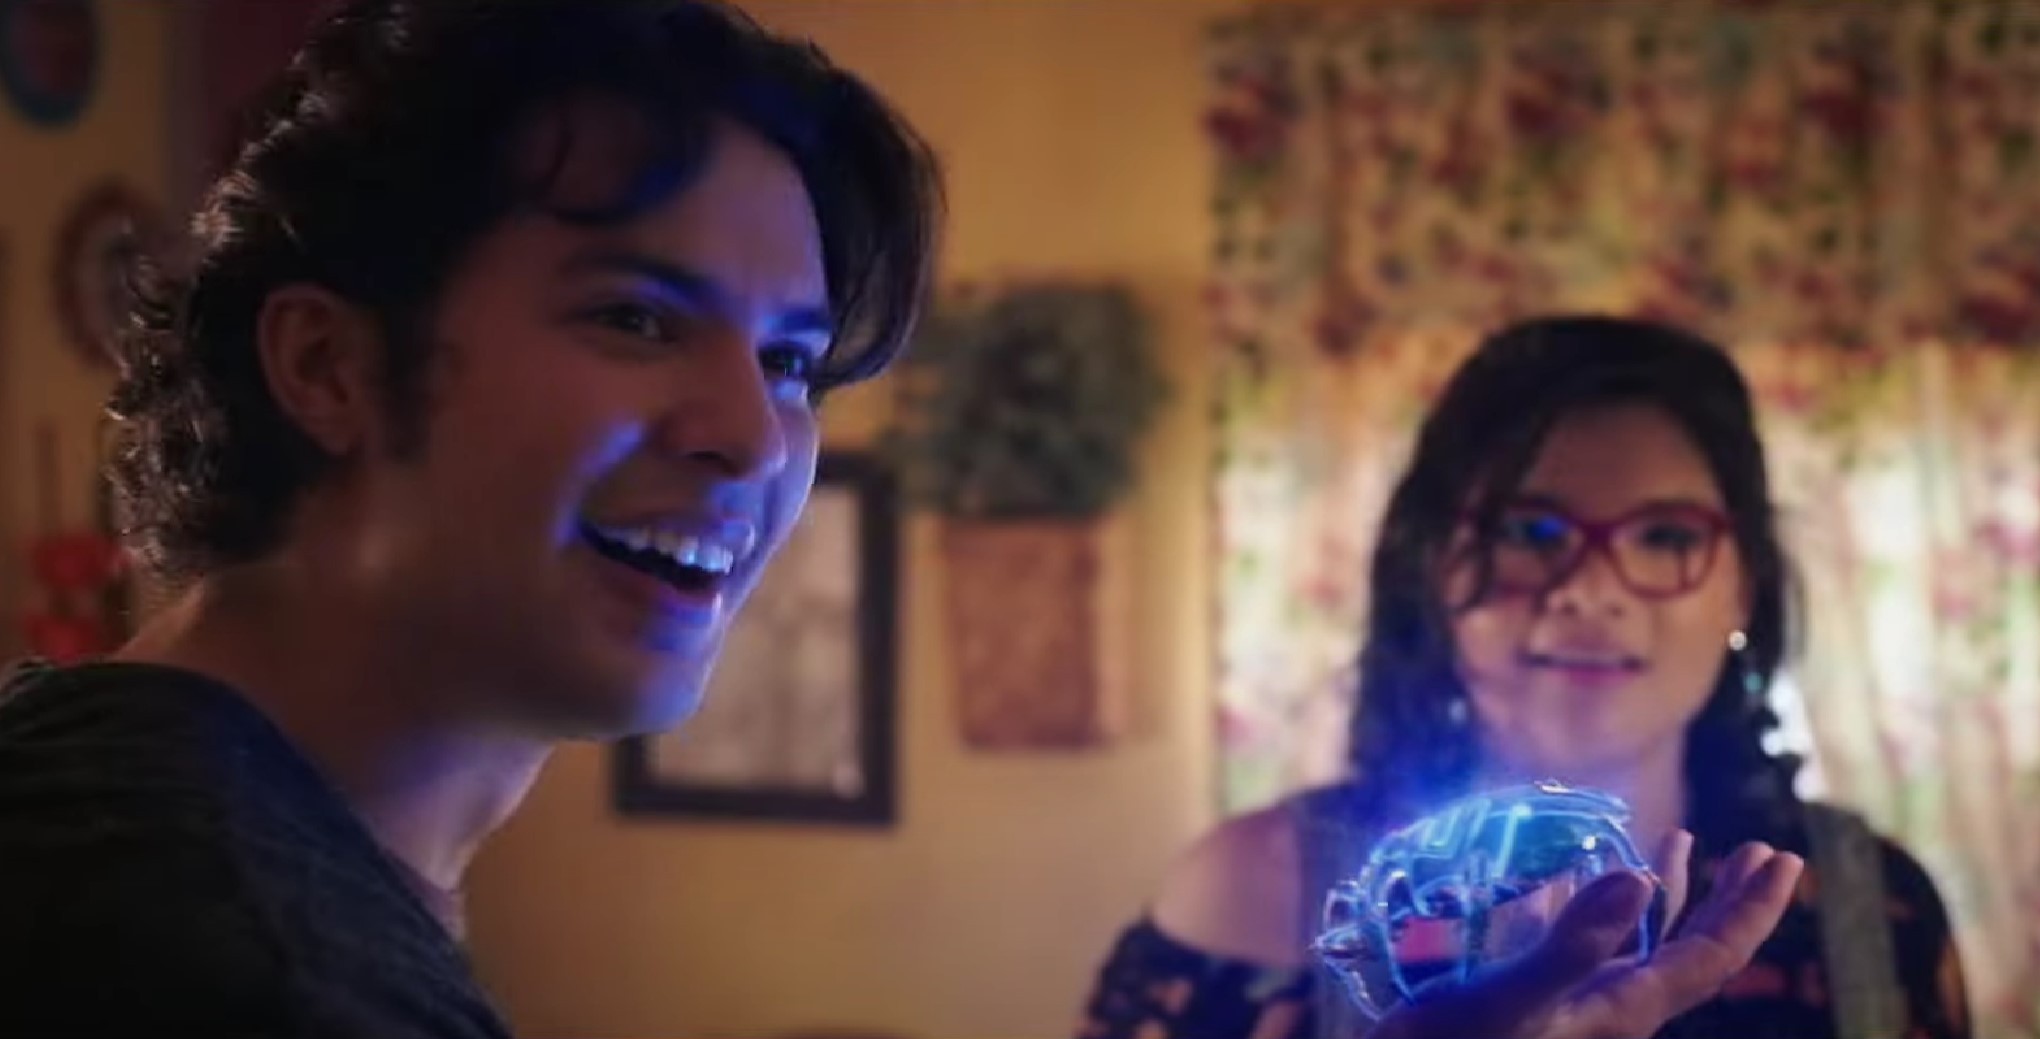 Screenshot of Xola Maridueña as Jaime Reyes and Belissa Escobedo as Milagro Reyes in the DCEU's 'Blue Beetle.' They are standing in a livingroom with floral curtains. Jaime is a Mexican man with brown skin and shaggy dark hair, wearing a black shirt. He's turned to someone and smiling as he holds a glowing, blue scarab in his hand. Milagro stands in the background. She's a Mexican girl with shoulder-length dark hair, glasses, and is wearing an off-the-shoulder black shirt. She's looking at the scarab in amazement. 